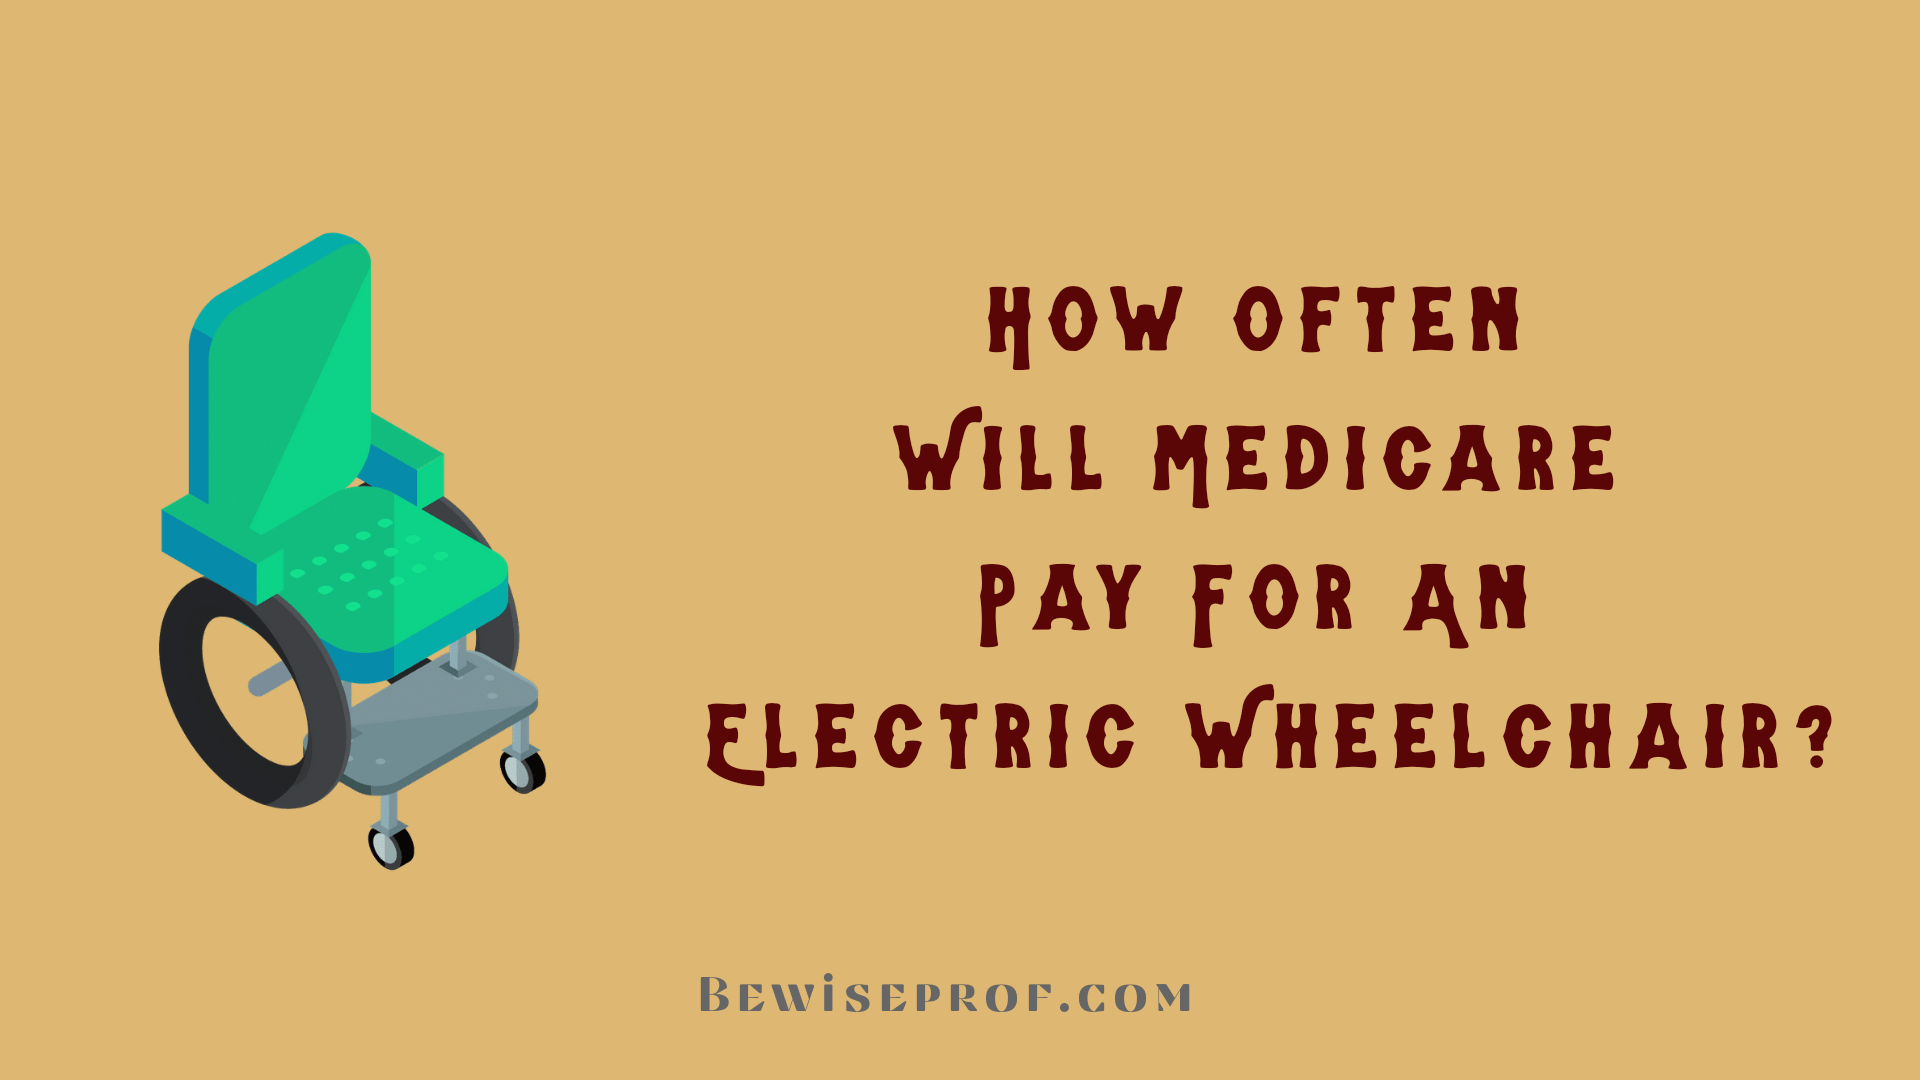 How often will Medicare pay for an electric wheelchair